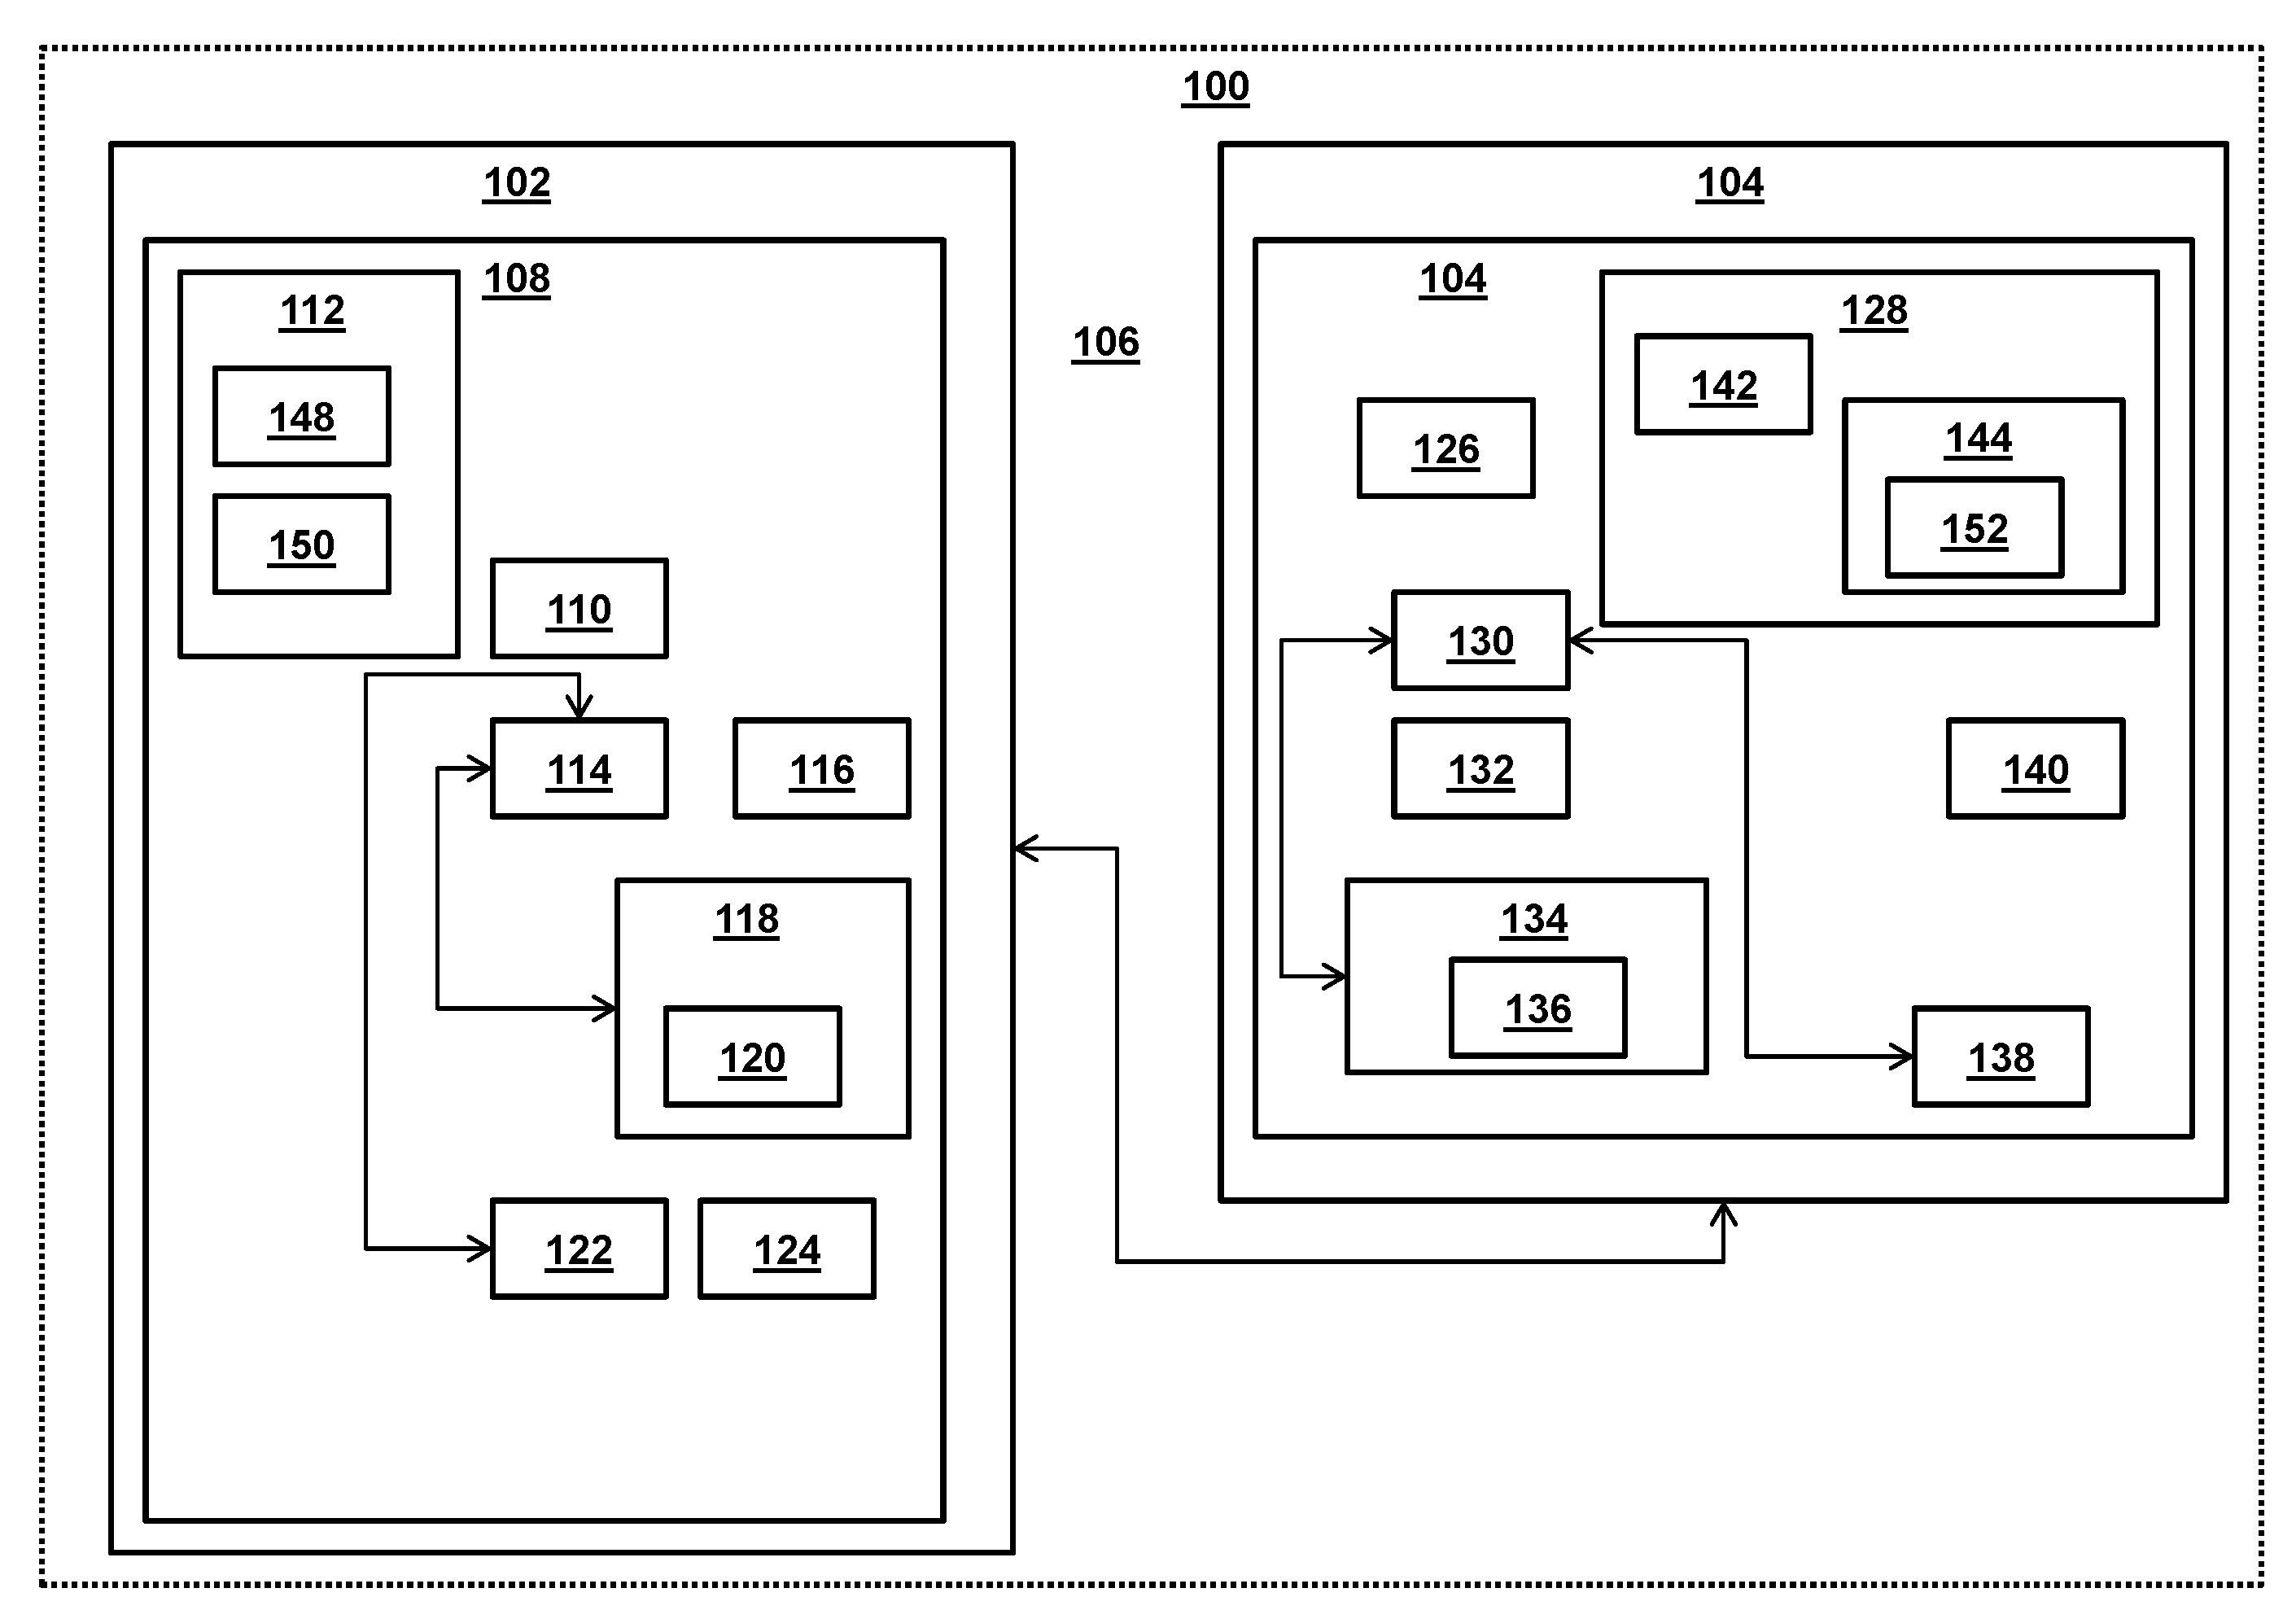 Method and system for managing public safety in at least one of unknown, unexpected, unwanted and untimely situations via offering indemnity in conjunction with wearable computing and communications devices